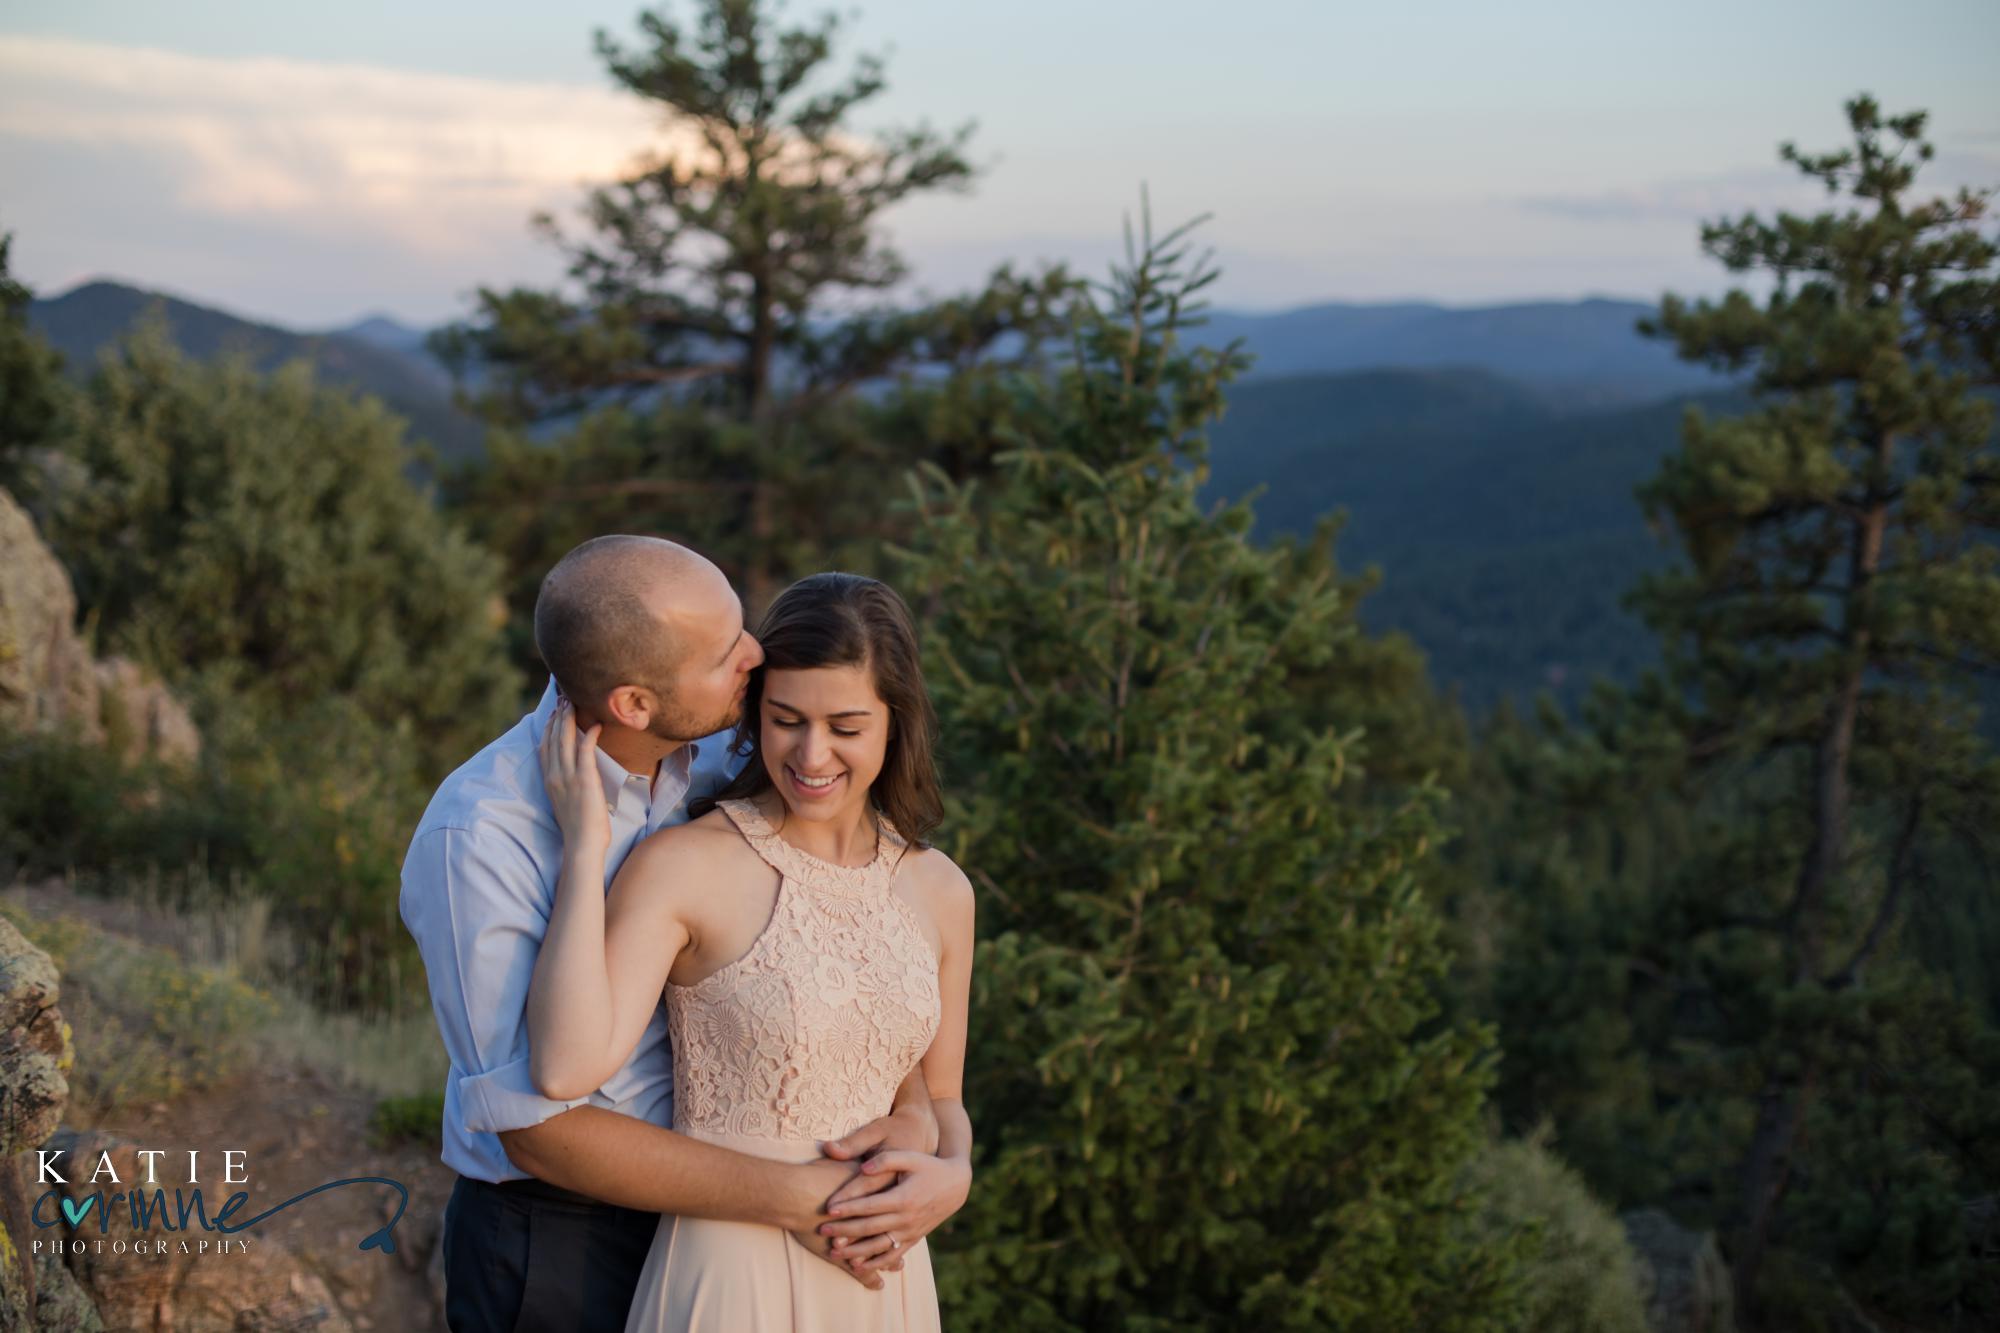 Colorado Springs couple gets photographed during mountain engagement session